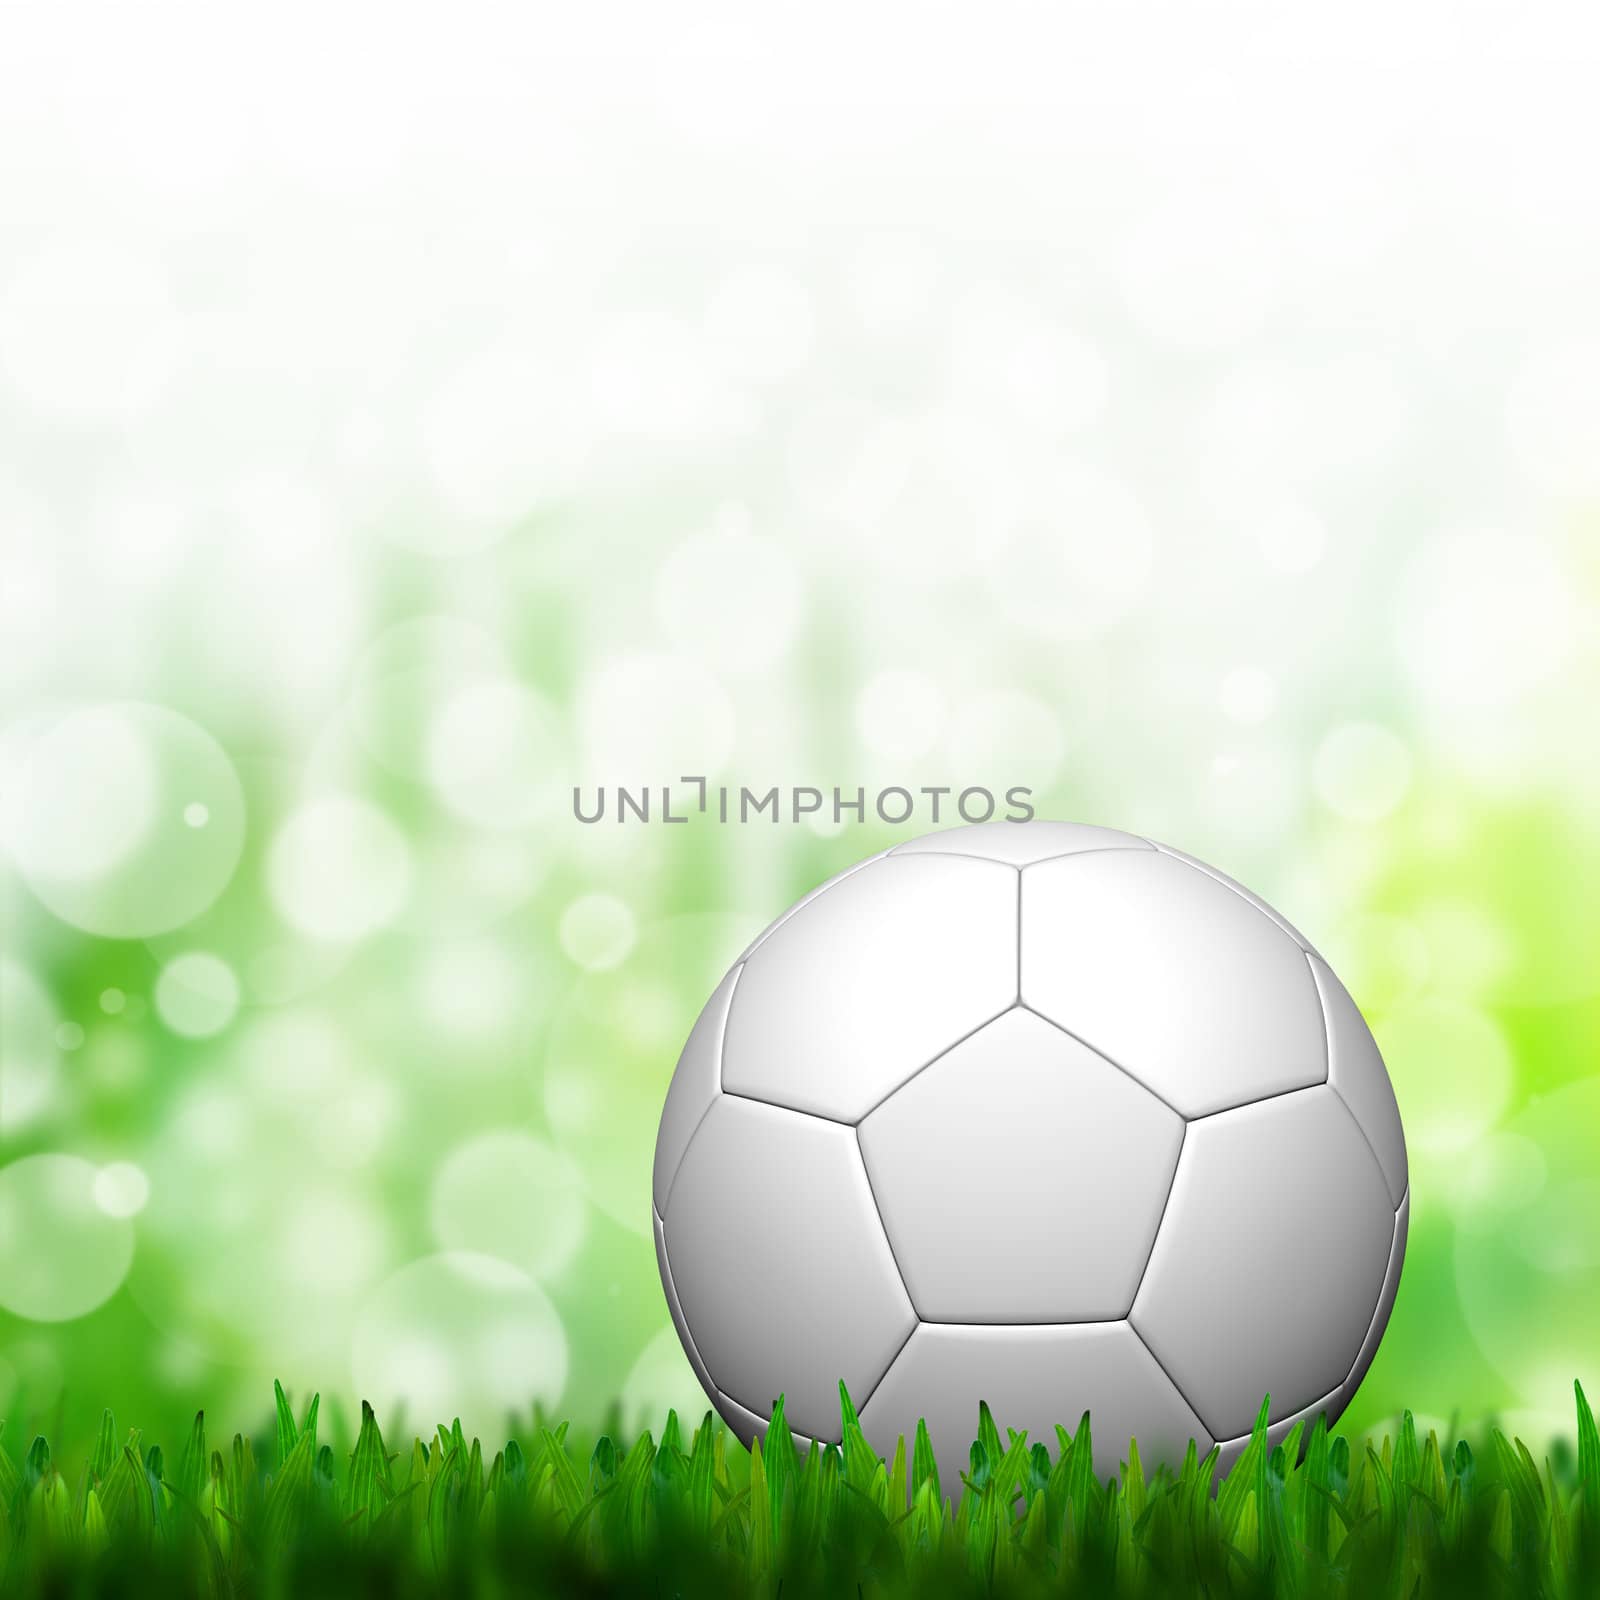 3D Football in green grass and background by jakgree